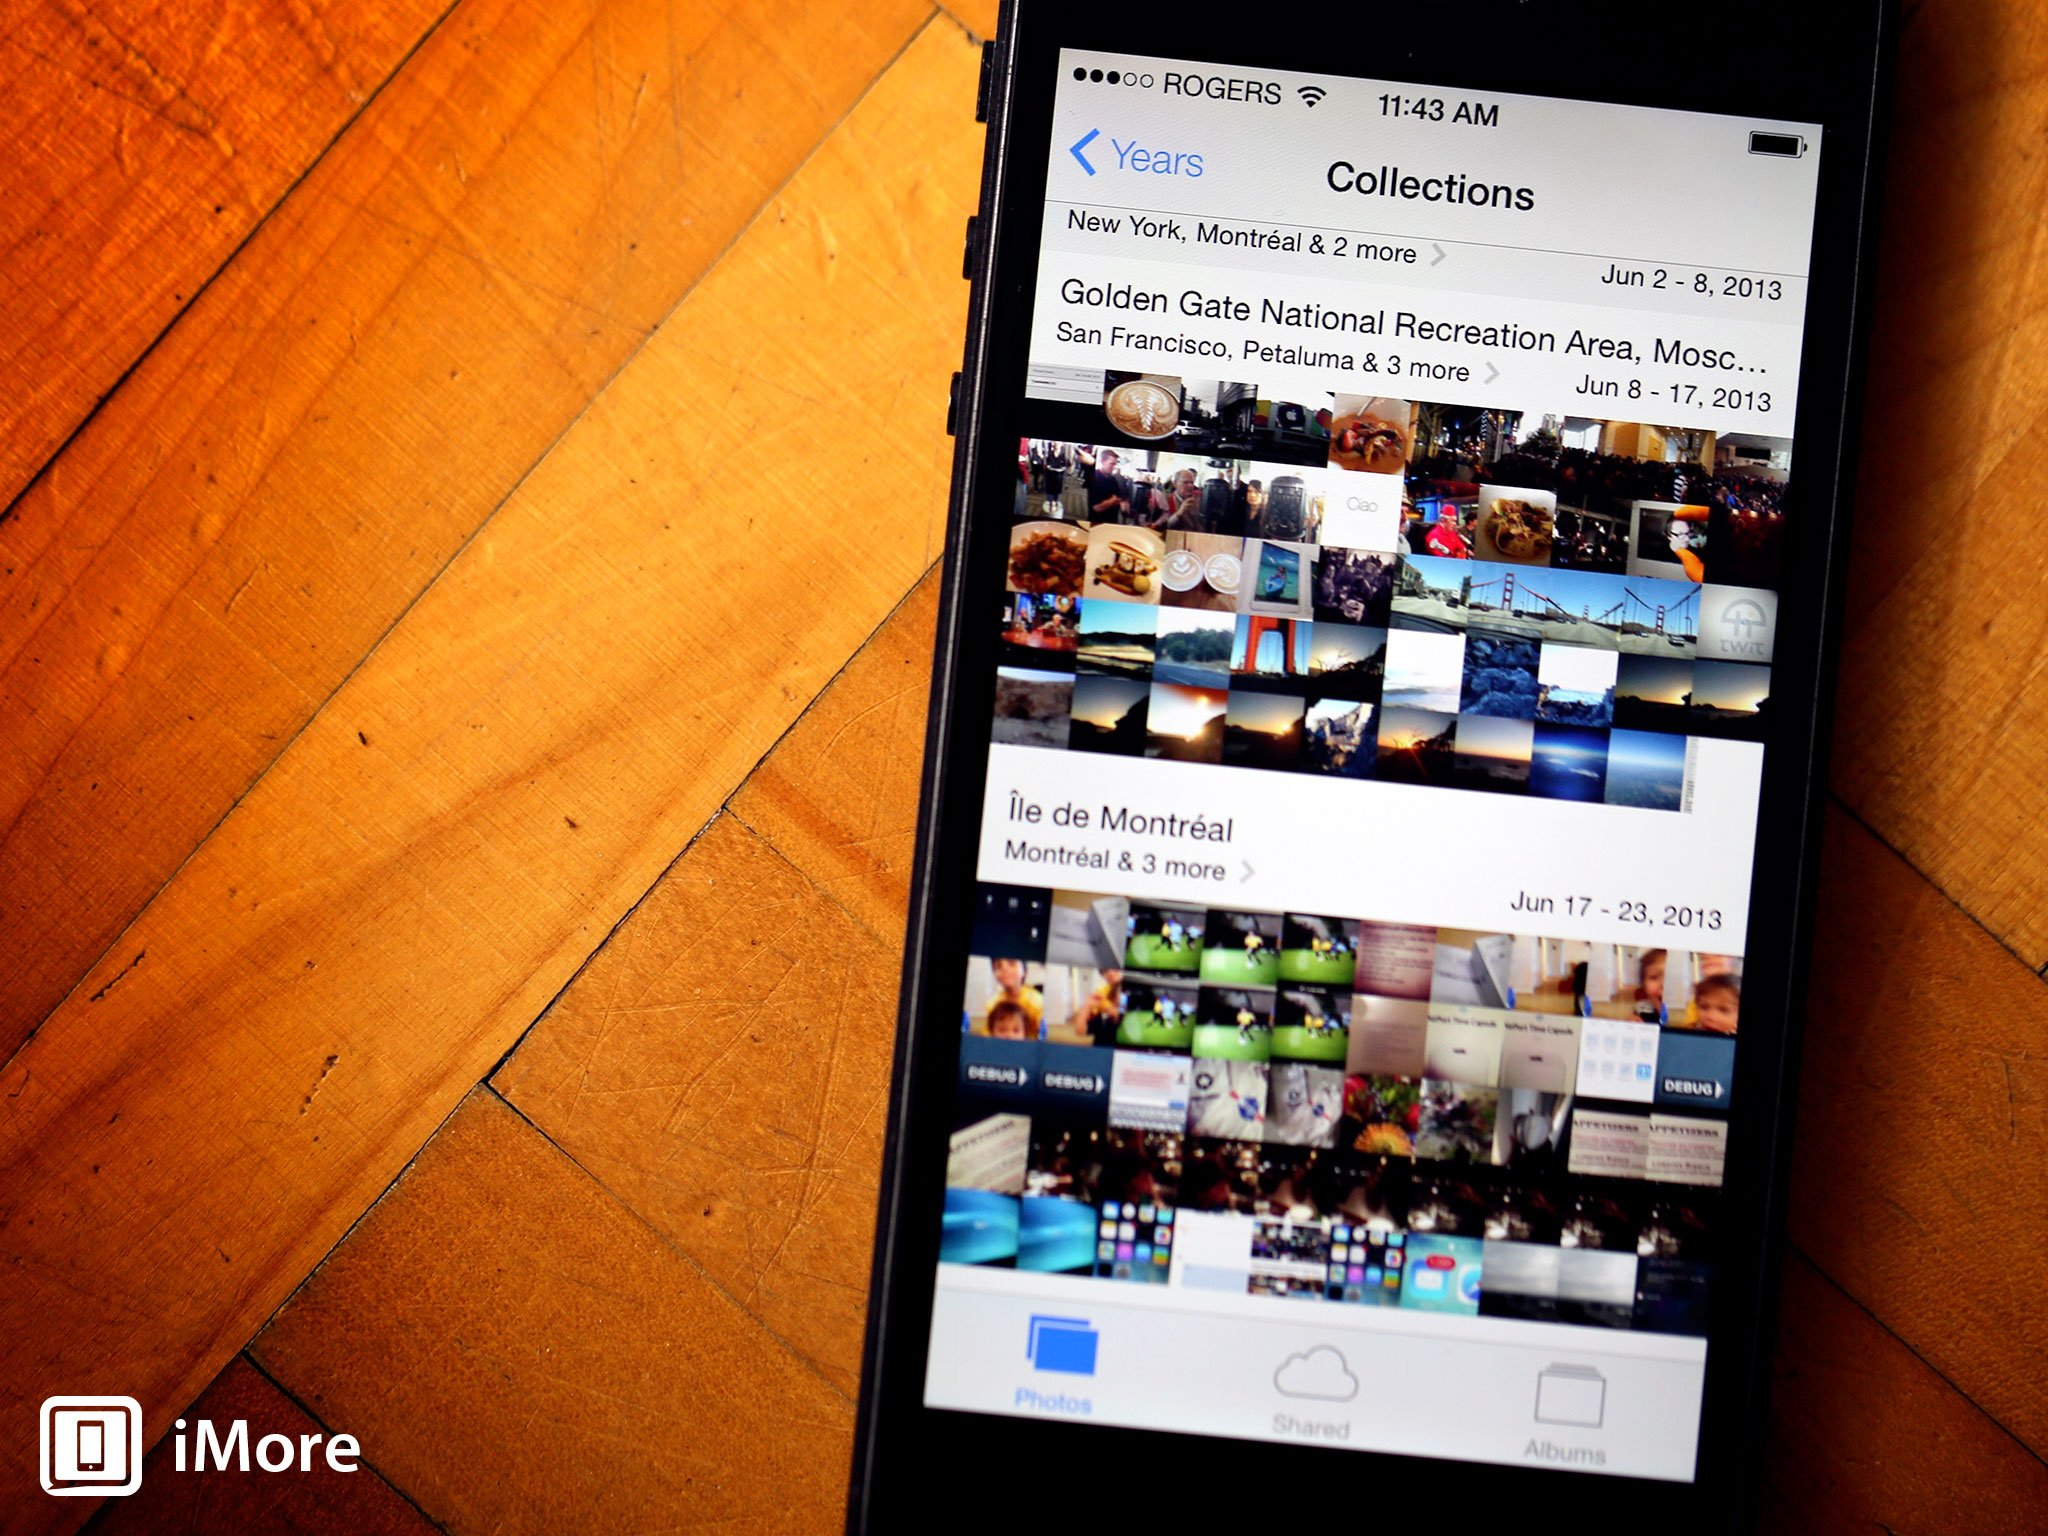 iOS 7: Photos automagically filters your life into collections, moments, and more